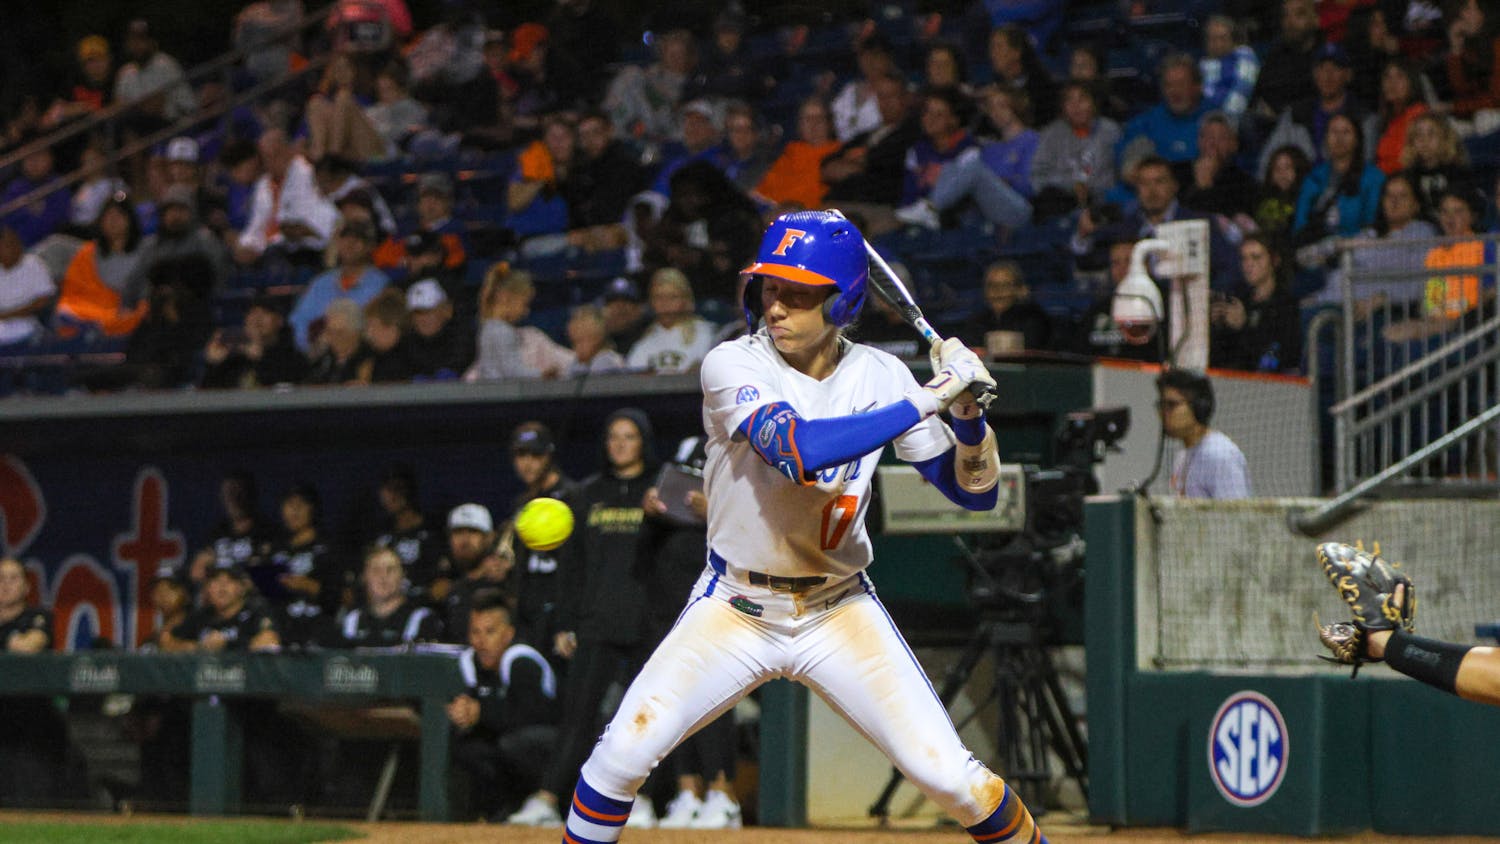 Florida shortstop Skylar Wallace swings her bat in the Gators' win against the Central Florida Knights Wednesday, March 8, 2023.